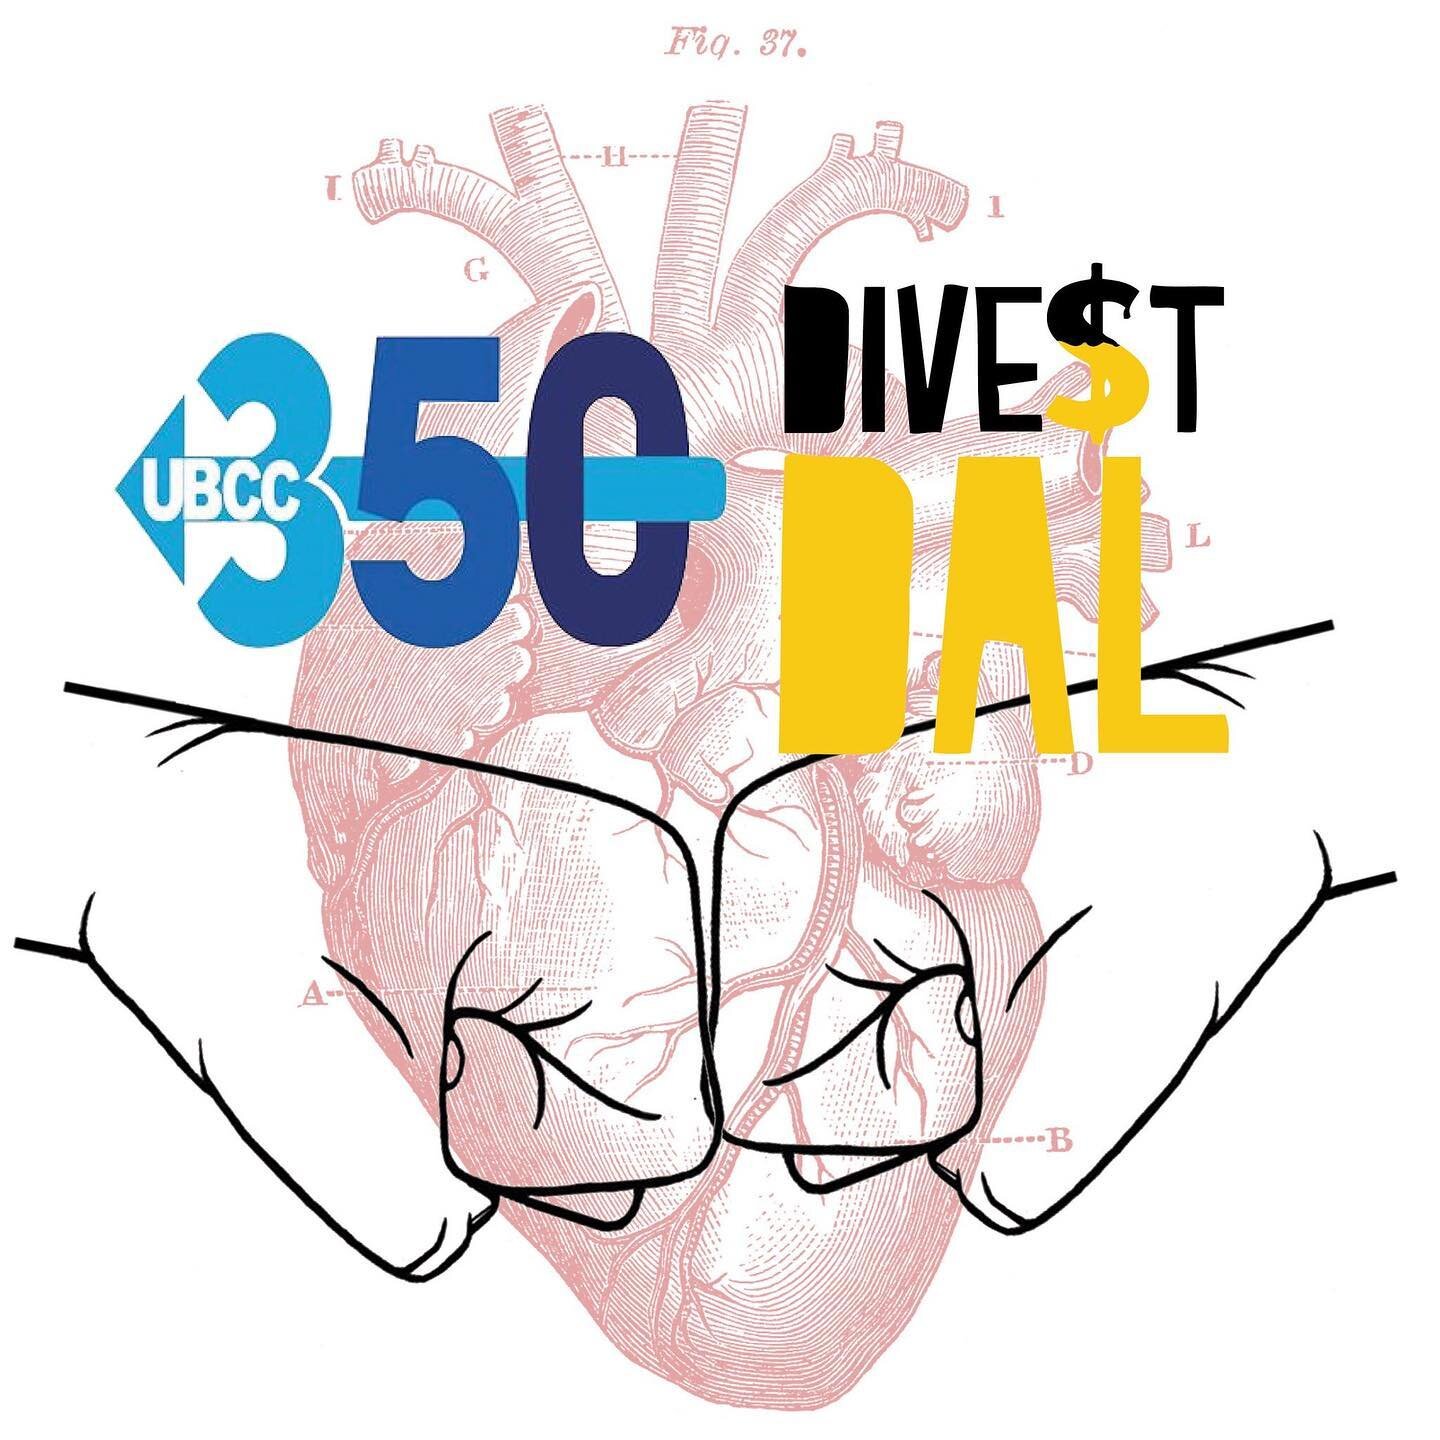 BREAKING: UBC COMMITS TO DIVESTMENT 😍😍😎🤓
The first time we posted this photo it was in solidarity with @ubcc350 who had just been told that their university would NOT divest. 
From there, @ubcc350 put on a clinic for how to organize &lsquo;post-n